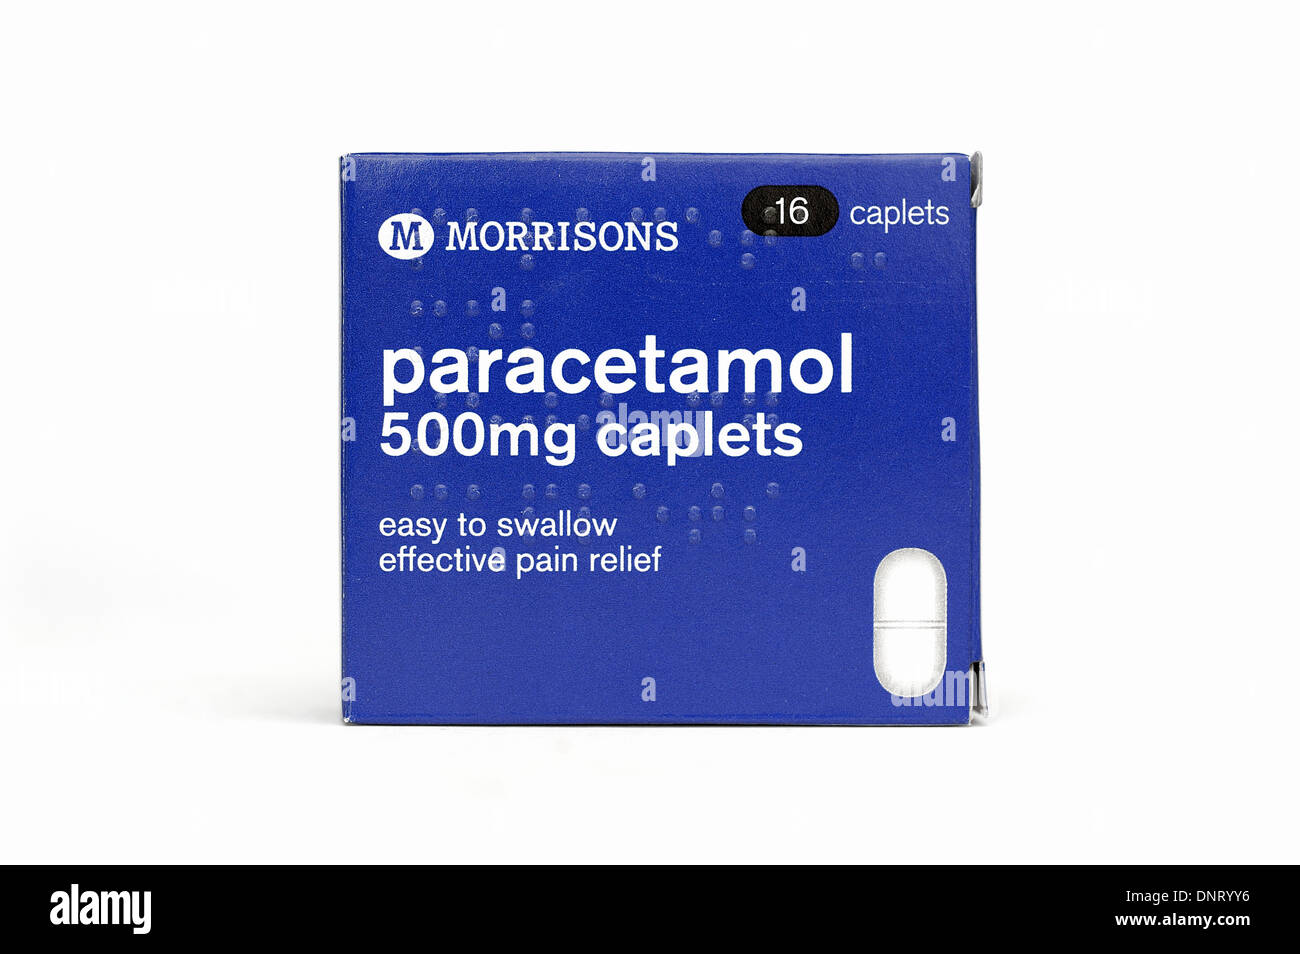 Morrison's own label paracetamol 500mg caplets easy to swallow effective pain relief Stock Photo